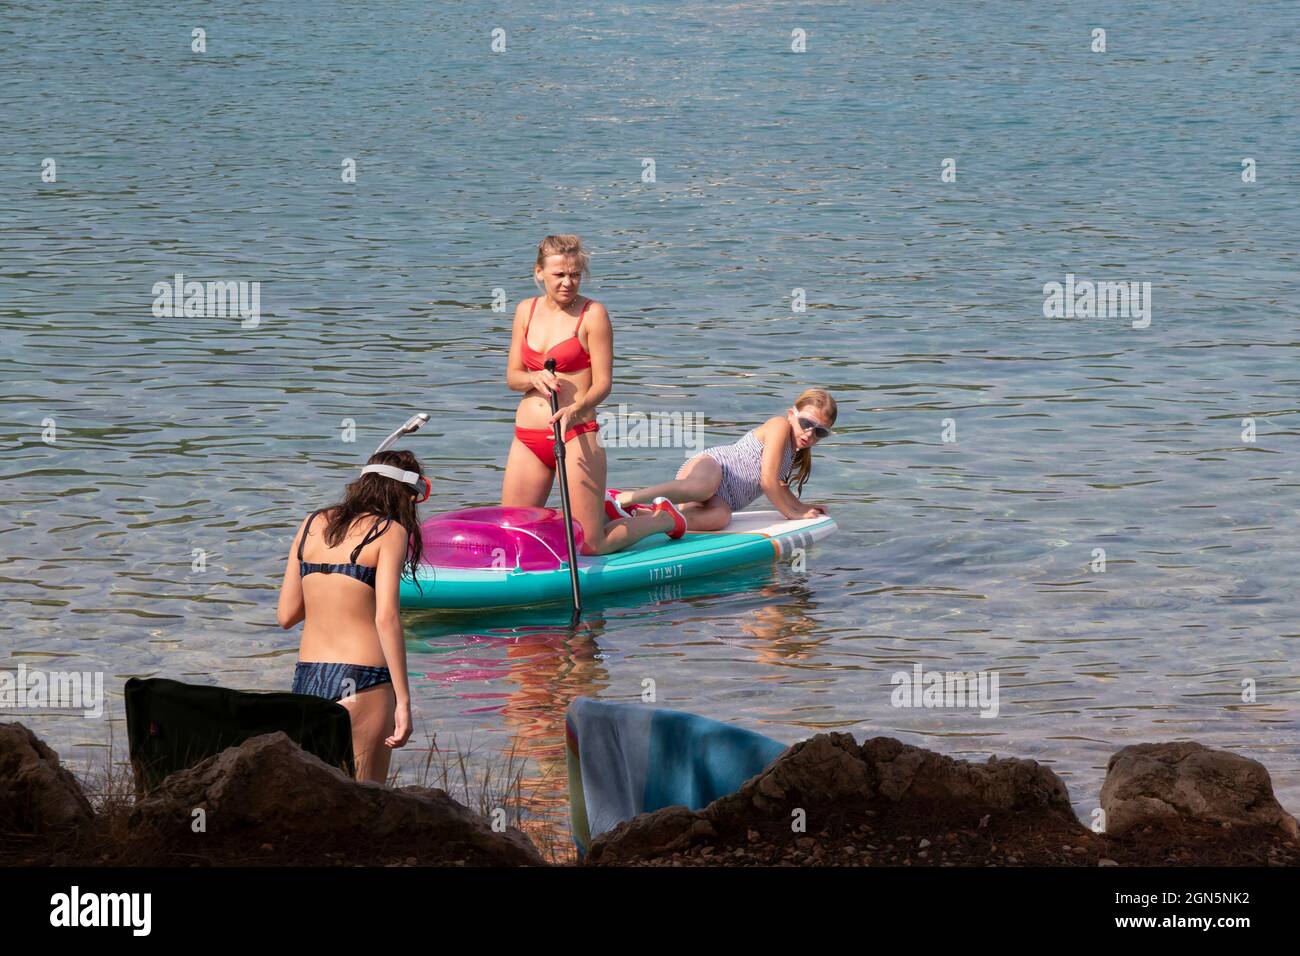 Kosirina, Murter, Croatia - August 24, 2021: Young woman in red swimsuit paddling on stand up board with girls playing, on the rocky beach waters Stock Photo